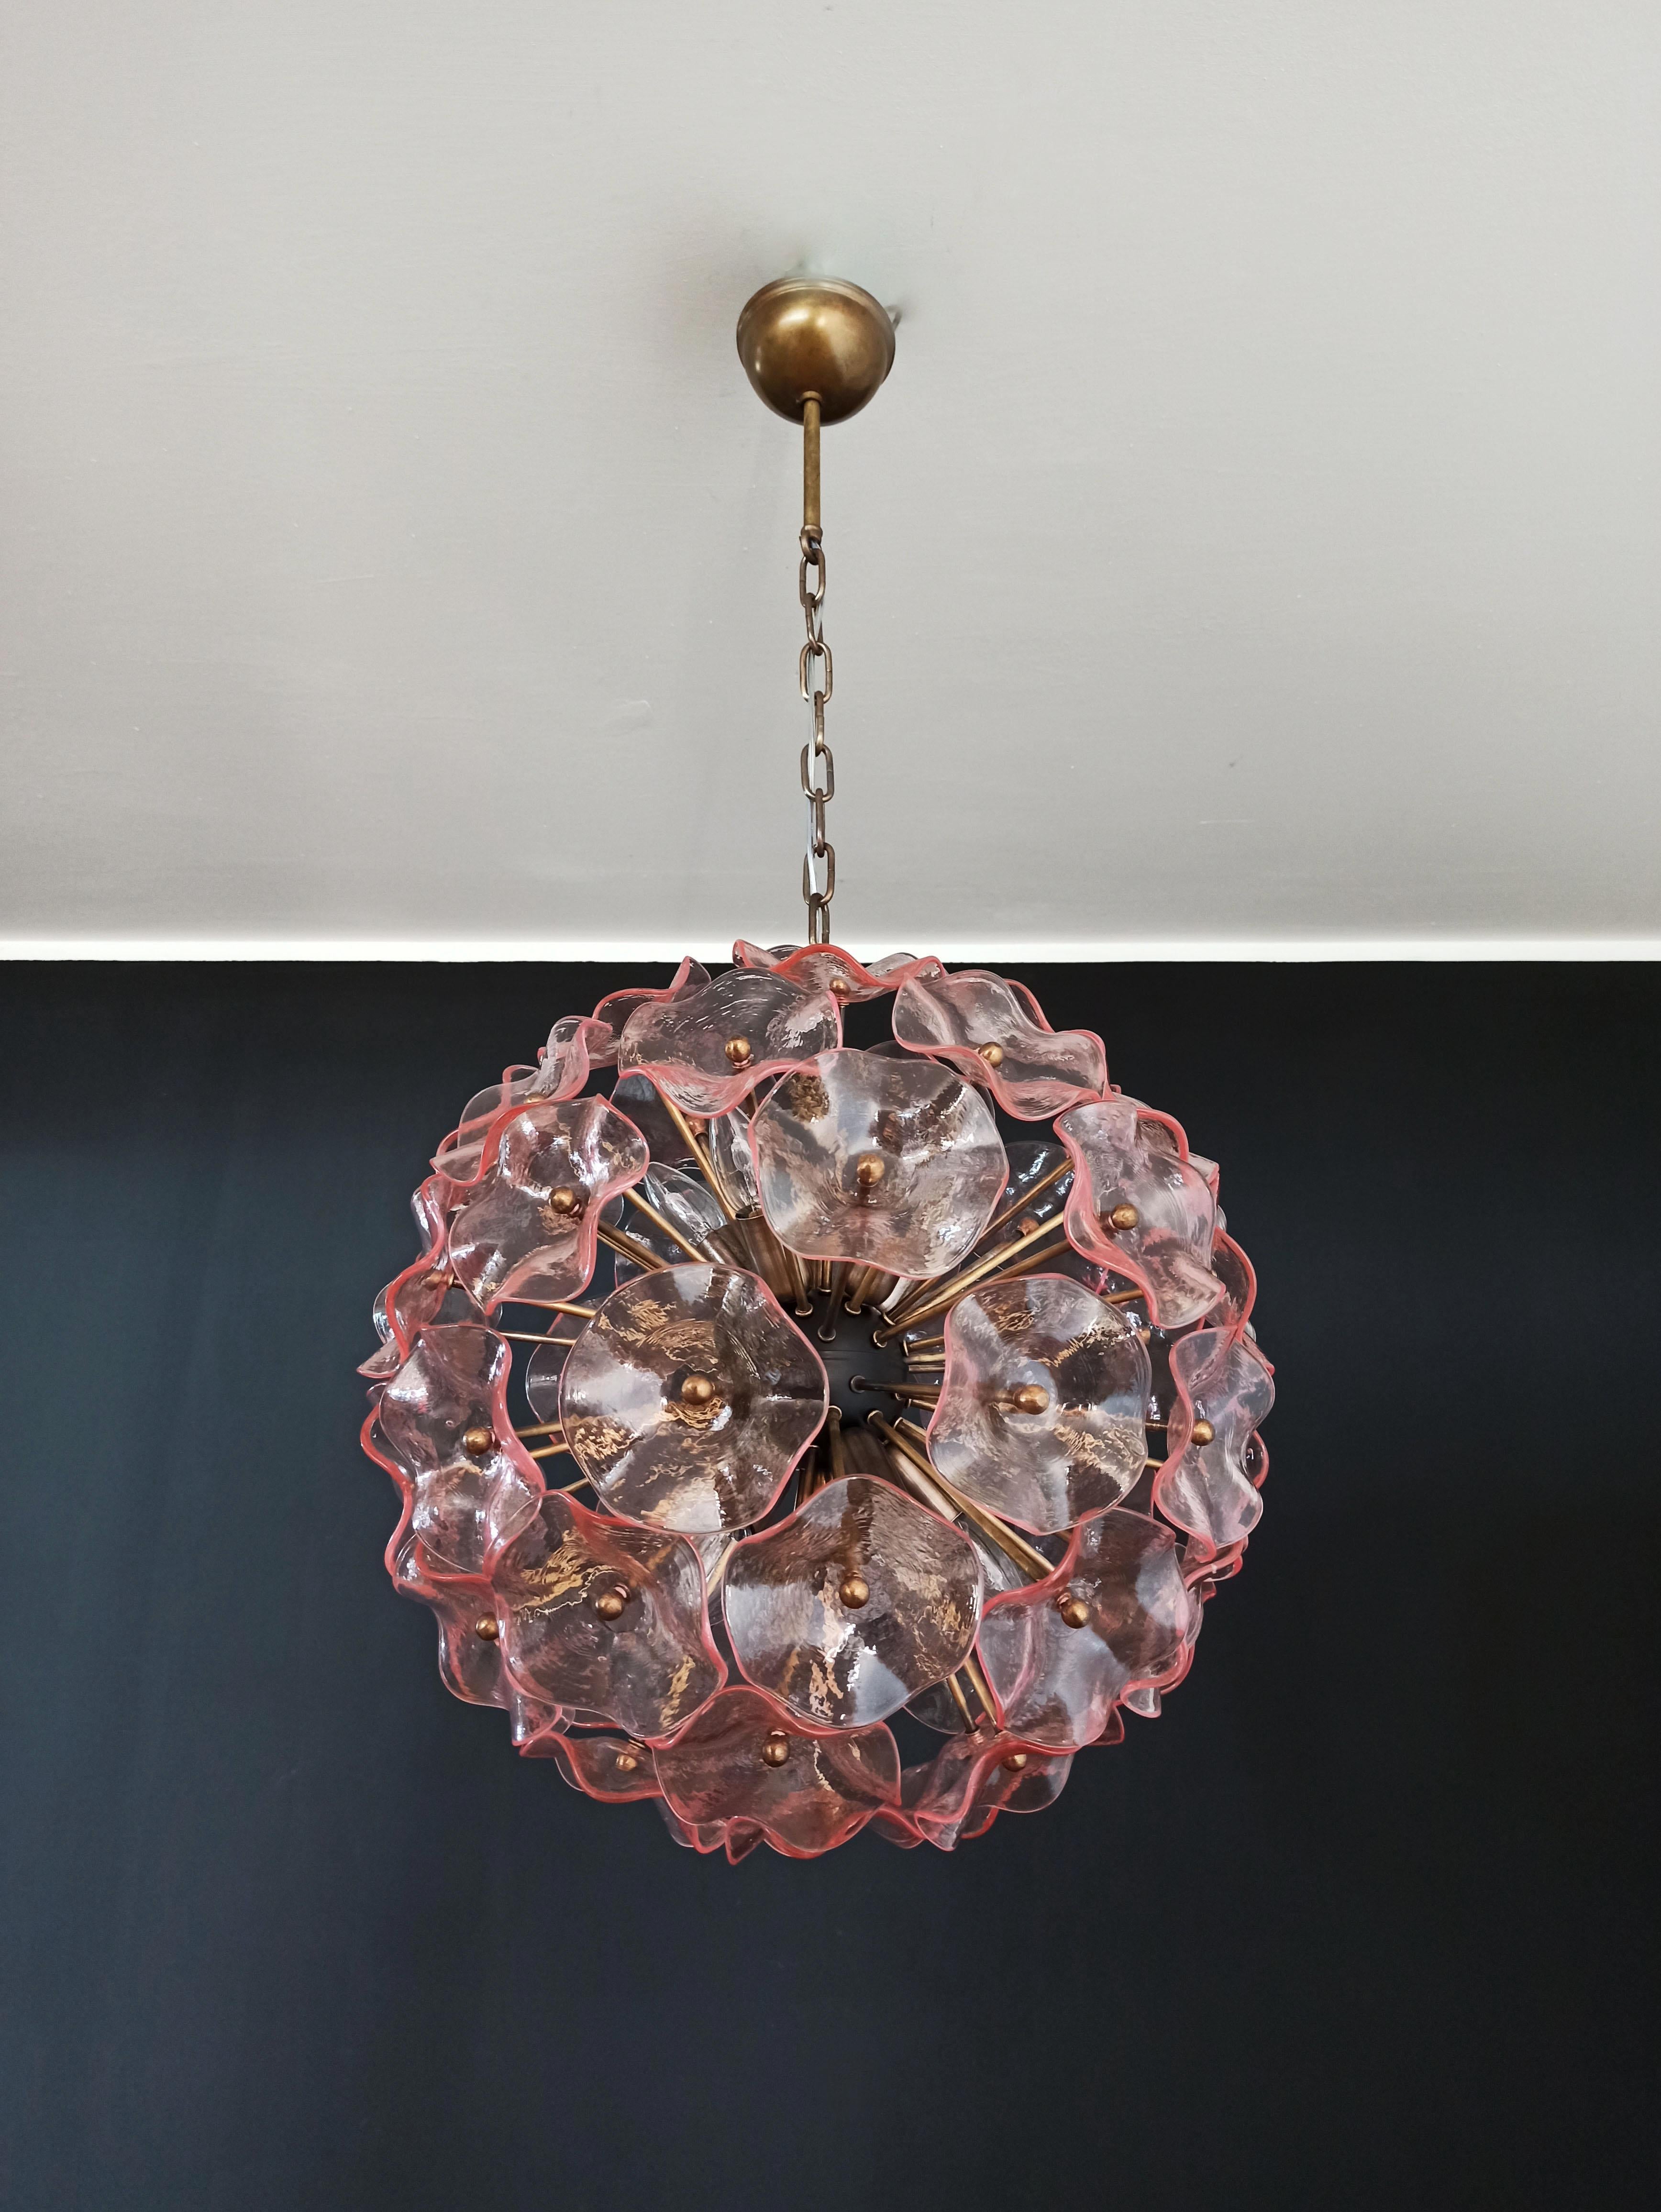 Sputnik space age Italian vintage crystal chandelier made by 51 pink crystals in a burnished brass metal frame.
Period: 1970s-1980s
Dimensions: 41.30 inches (105 cm) height with chain, 17.70 inches (45 cm) height without chain, 19.70 inches (50